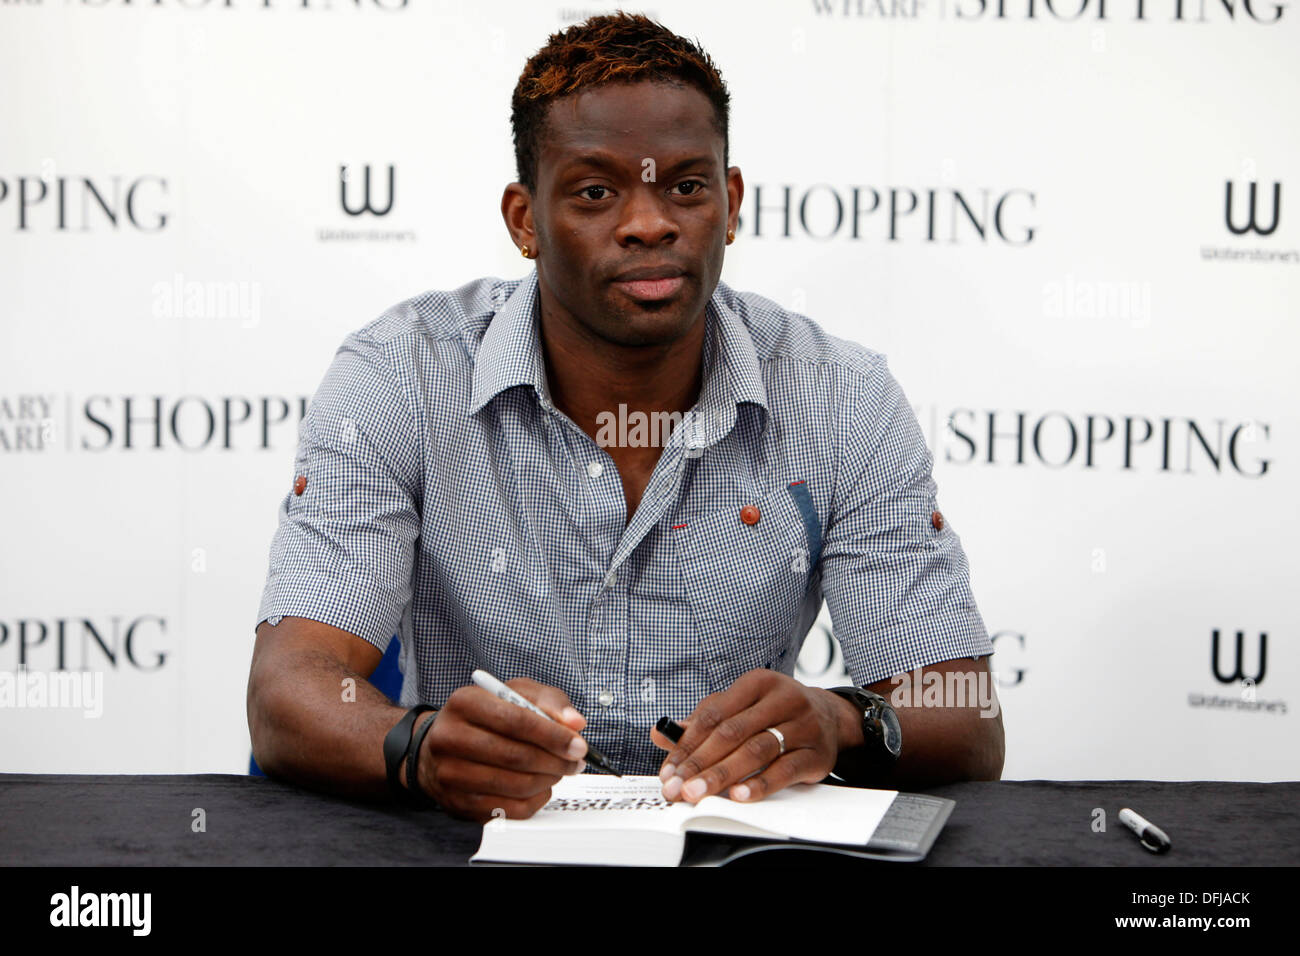 Louis Saha Tottenham Hotspur's footballer holds a copy of his new autobiography, Thinking Inside the Box: Reflections on Life as Stock Photo